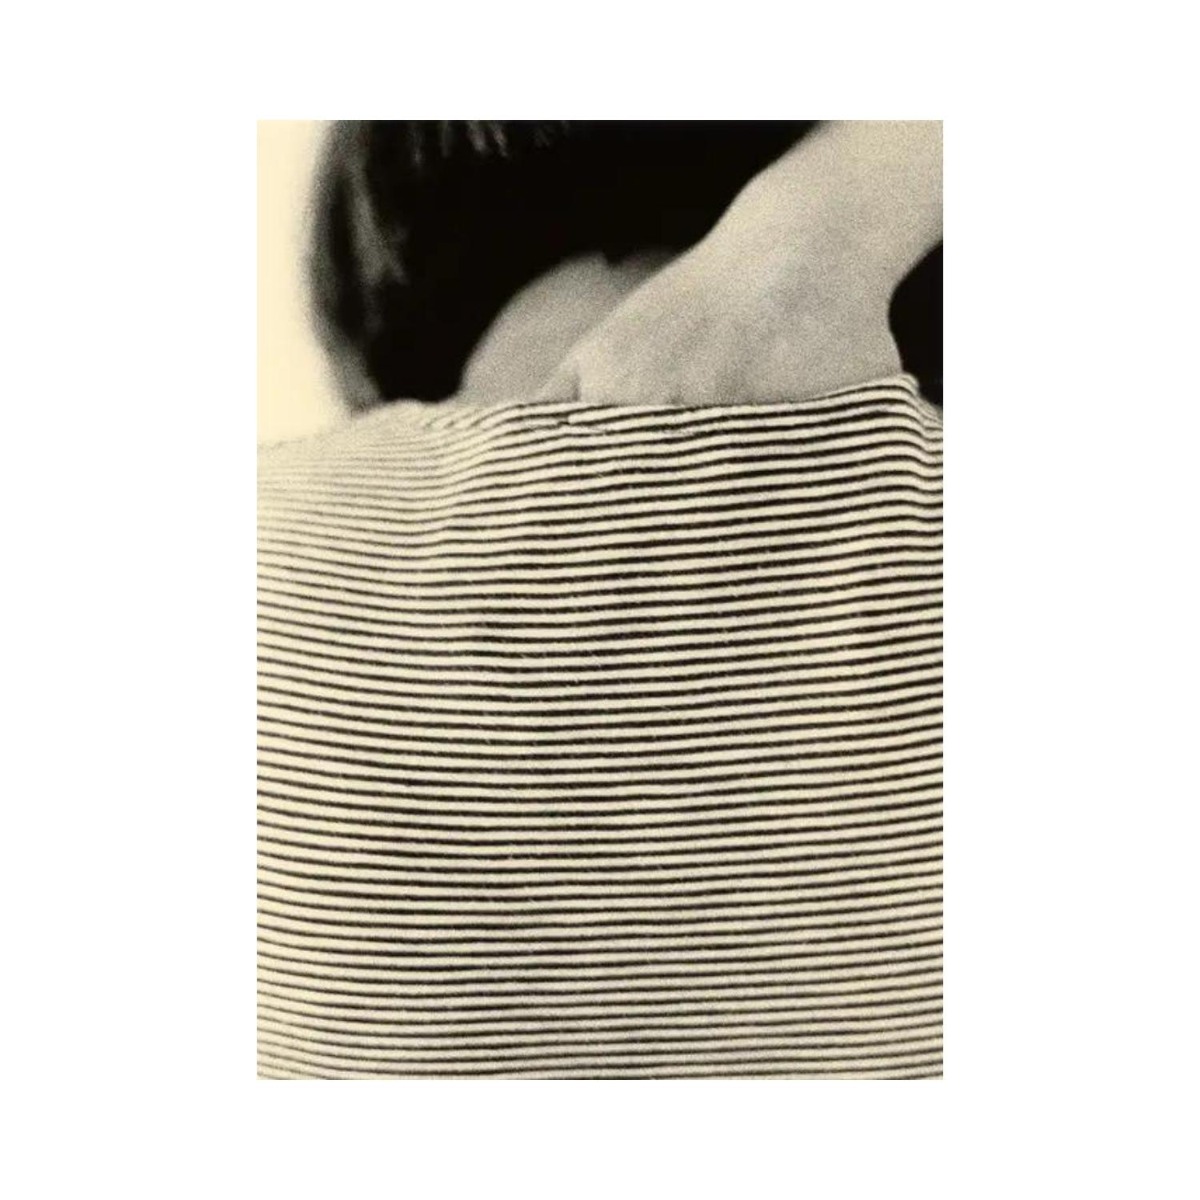 Paper Collective Poster Striped Shirt 30x40 cm